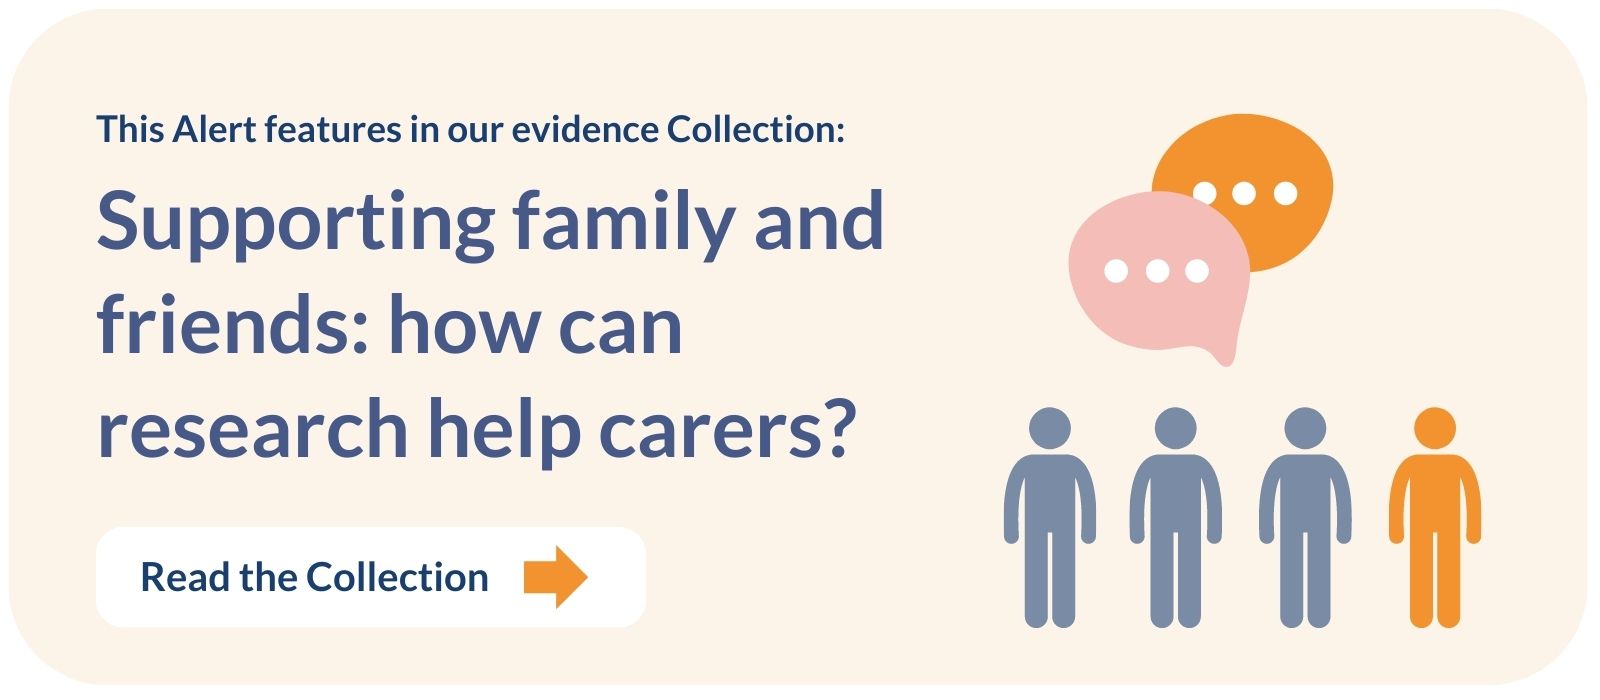 This Alert features in our evidence Collection: Supporting family and friends: how can research help carers? Read the Collection